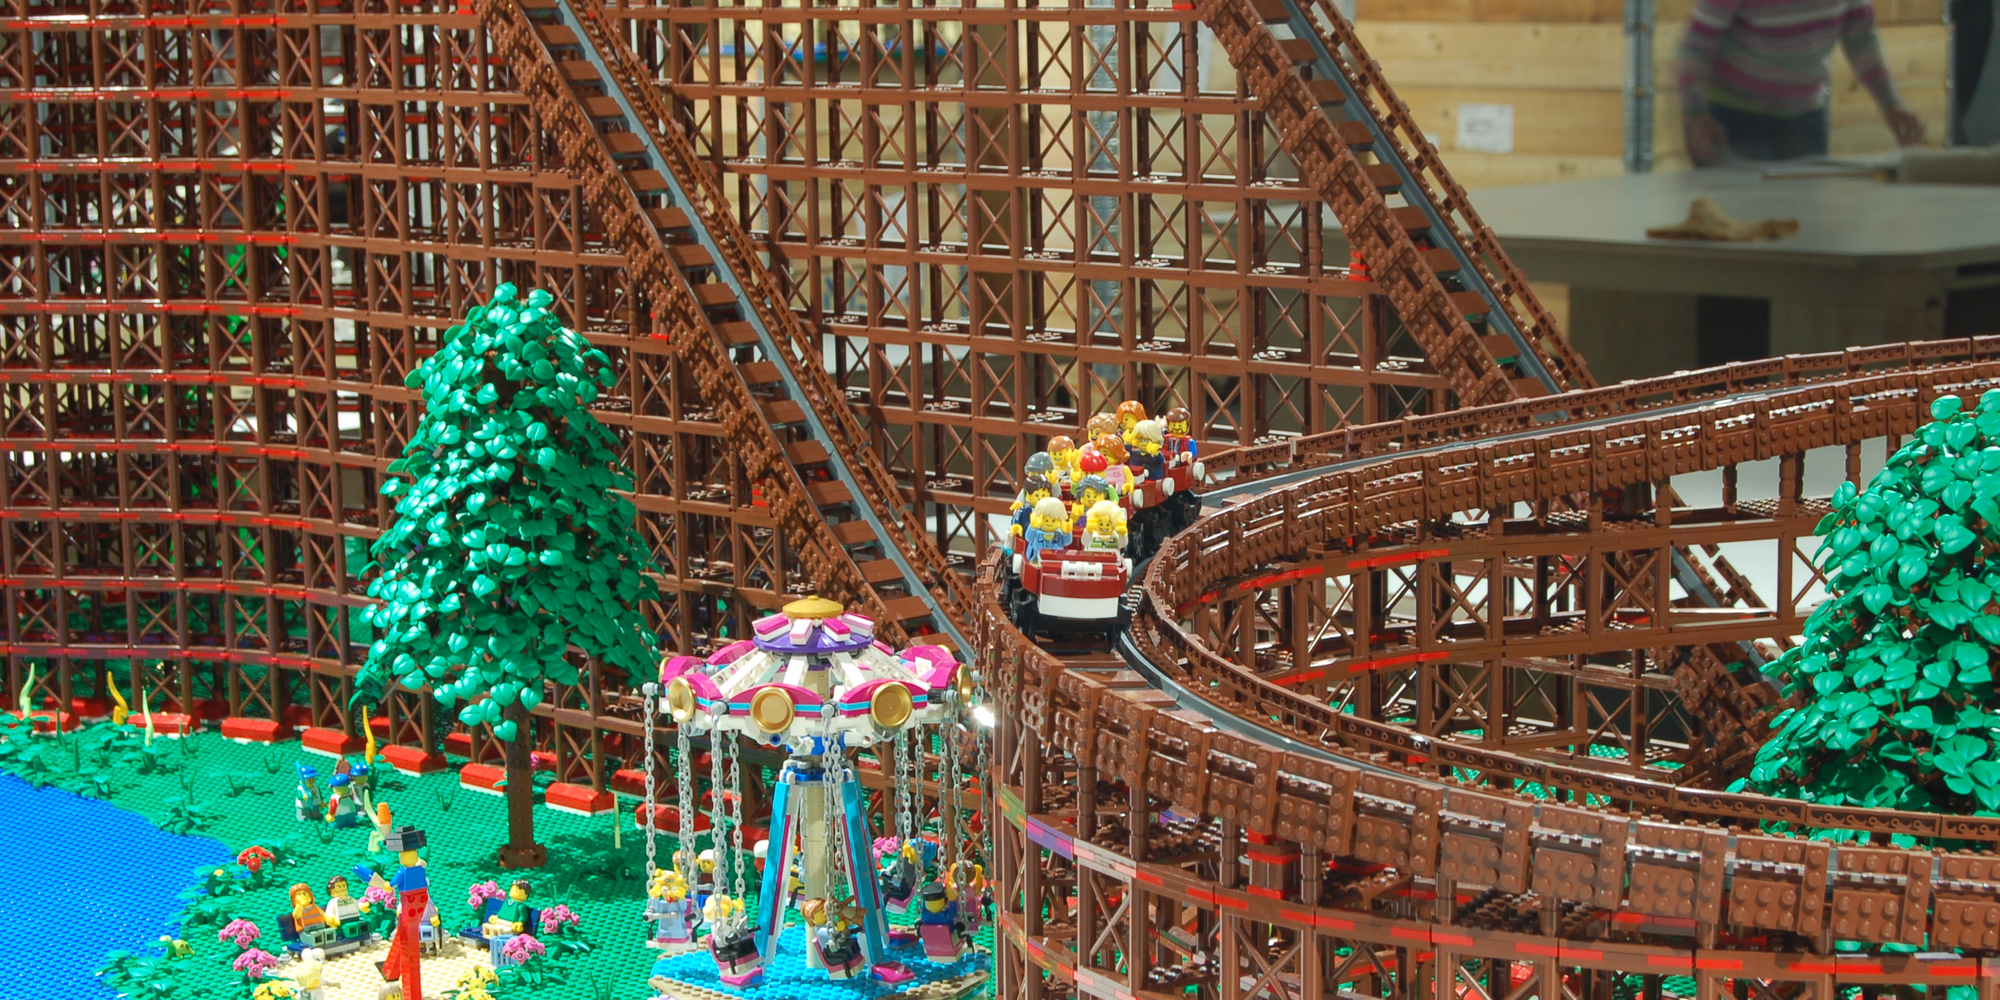 This amazing wooden roller coaster build is every Lego fan's